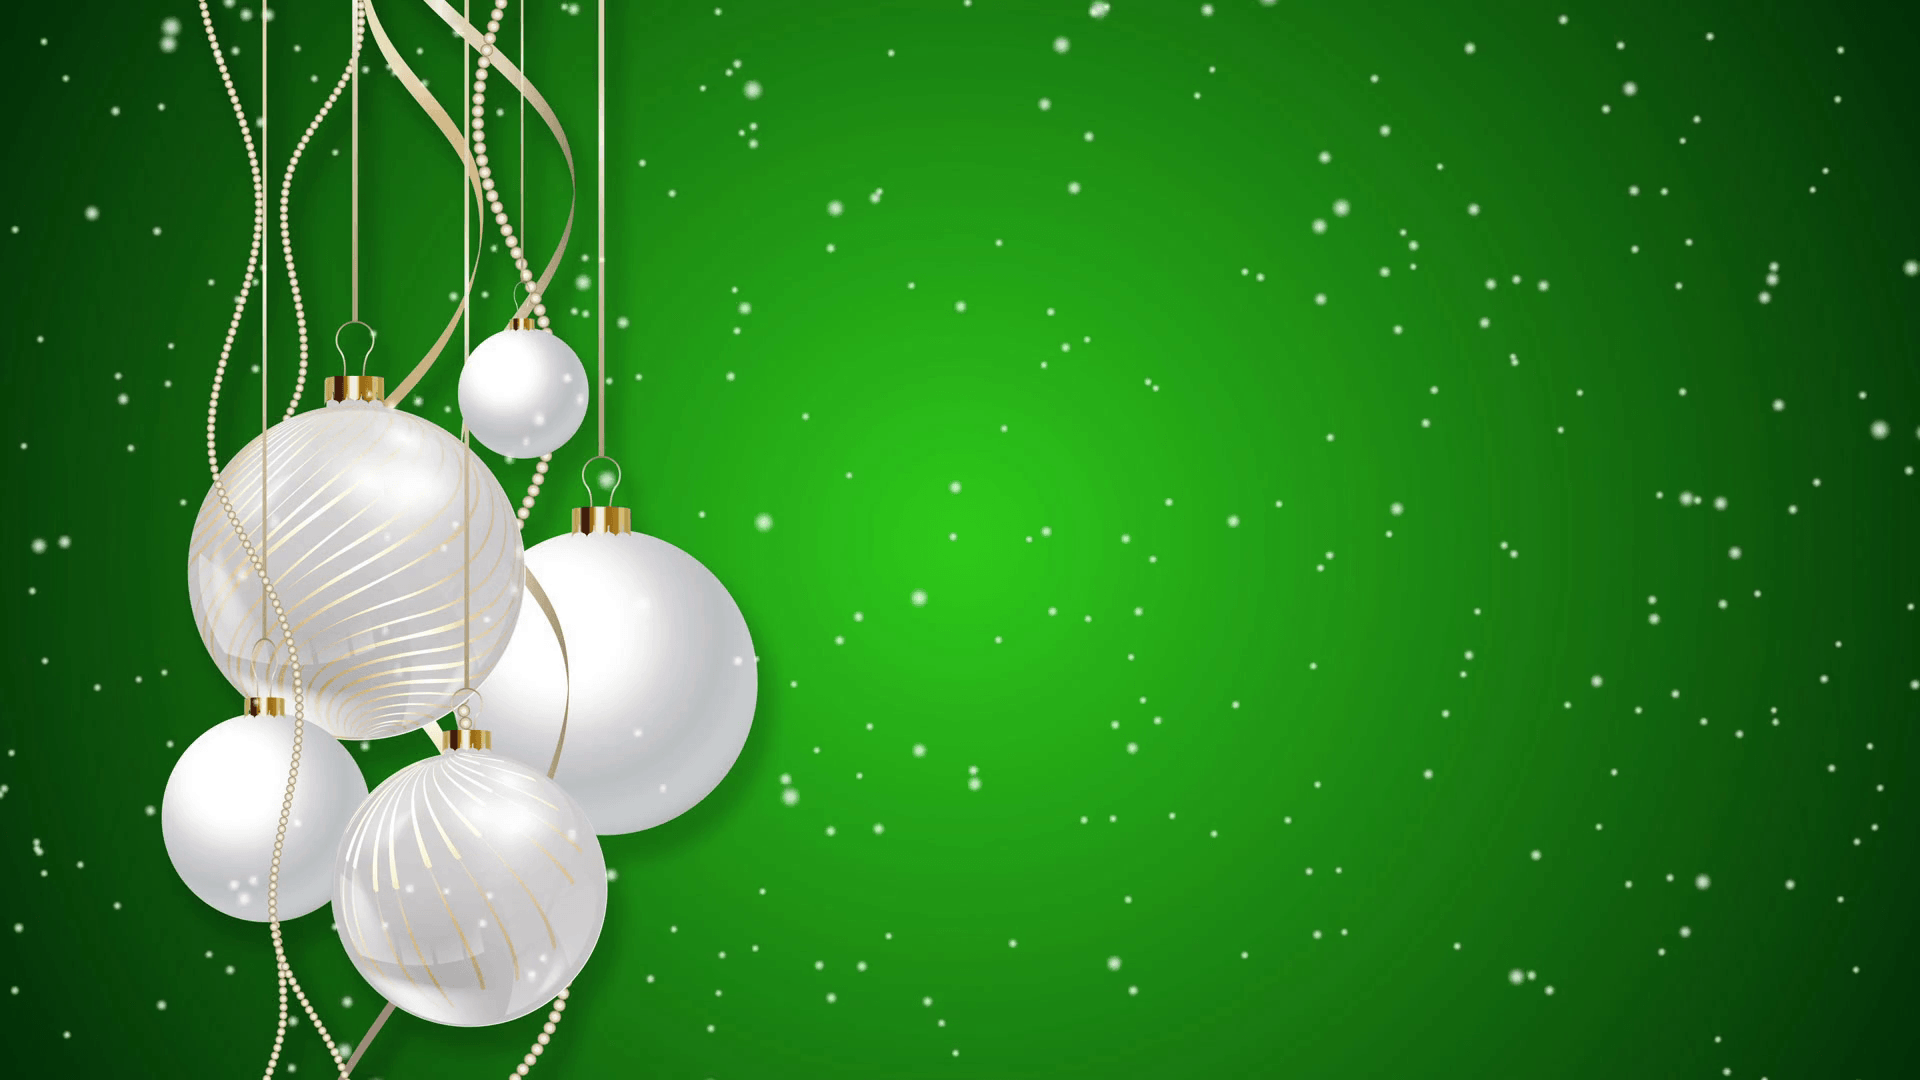 Christmas background with white decorations over a festive